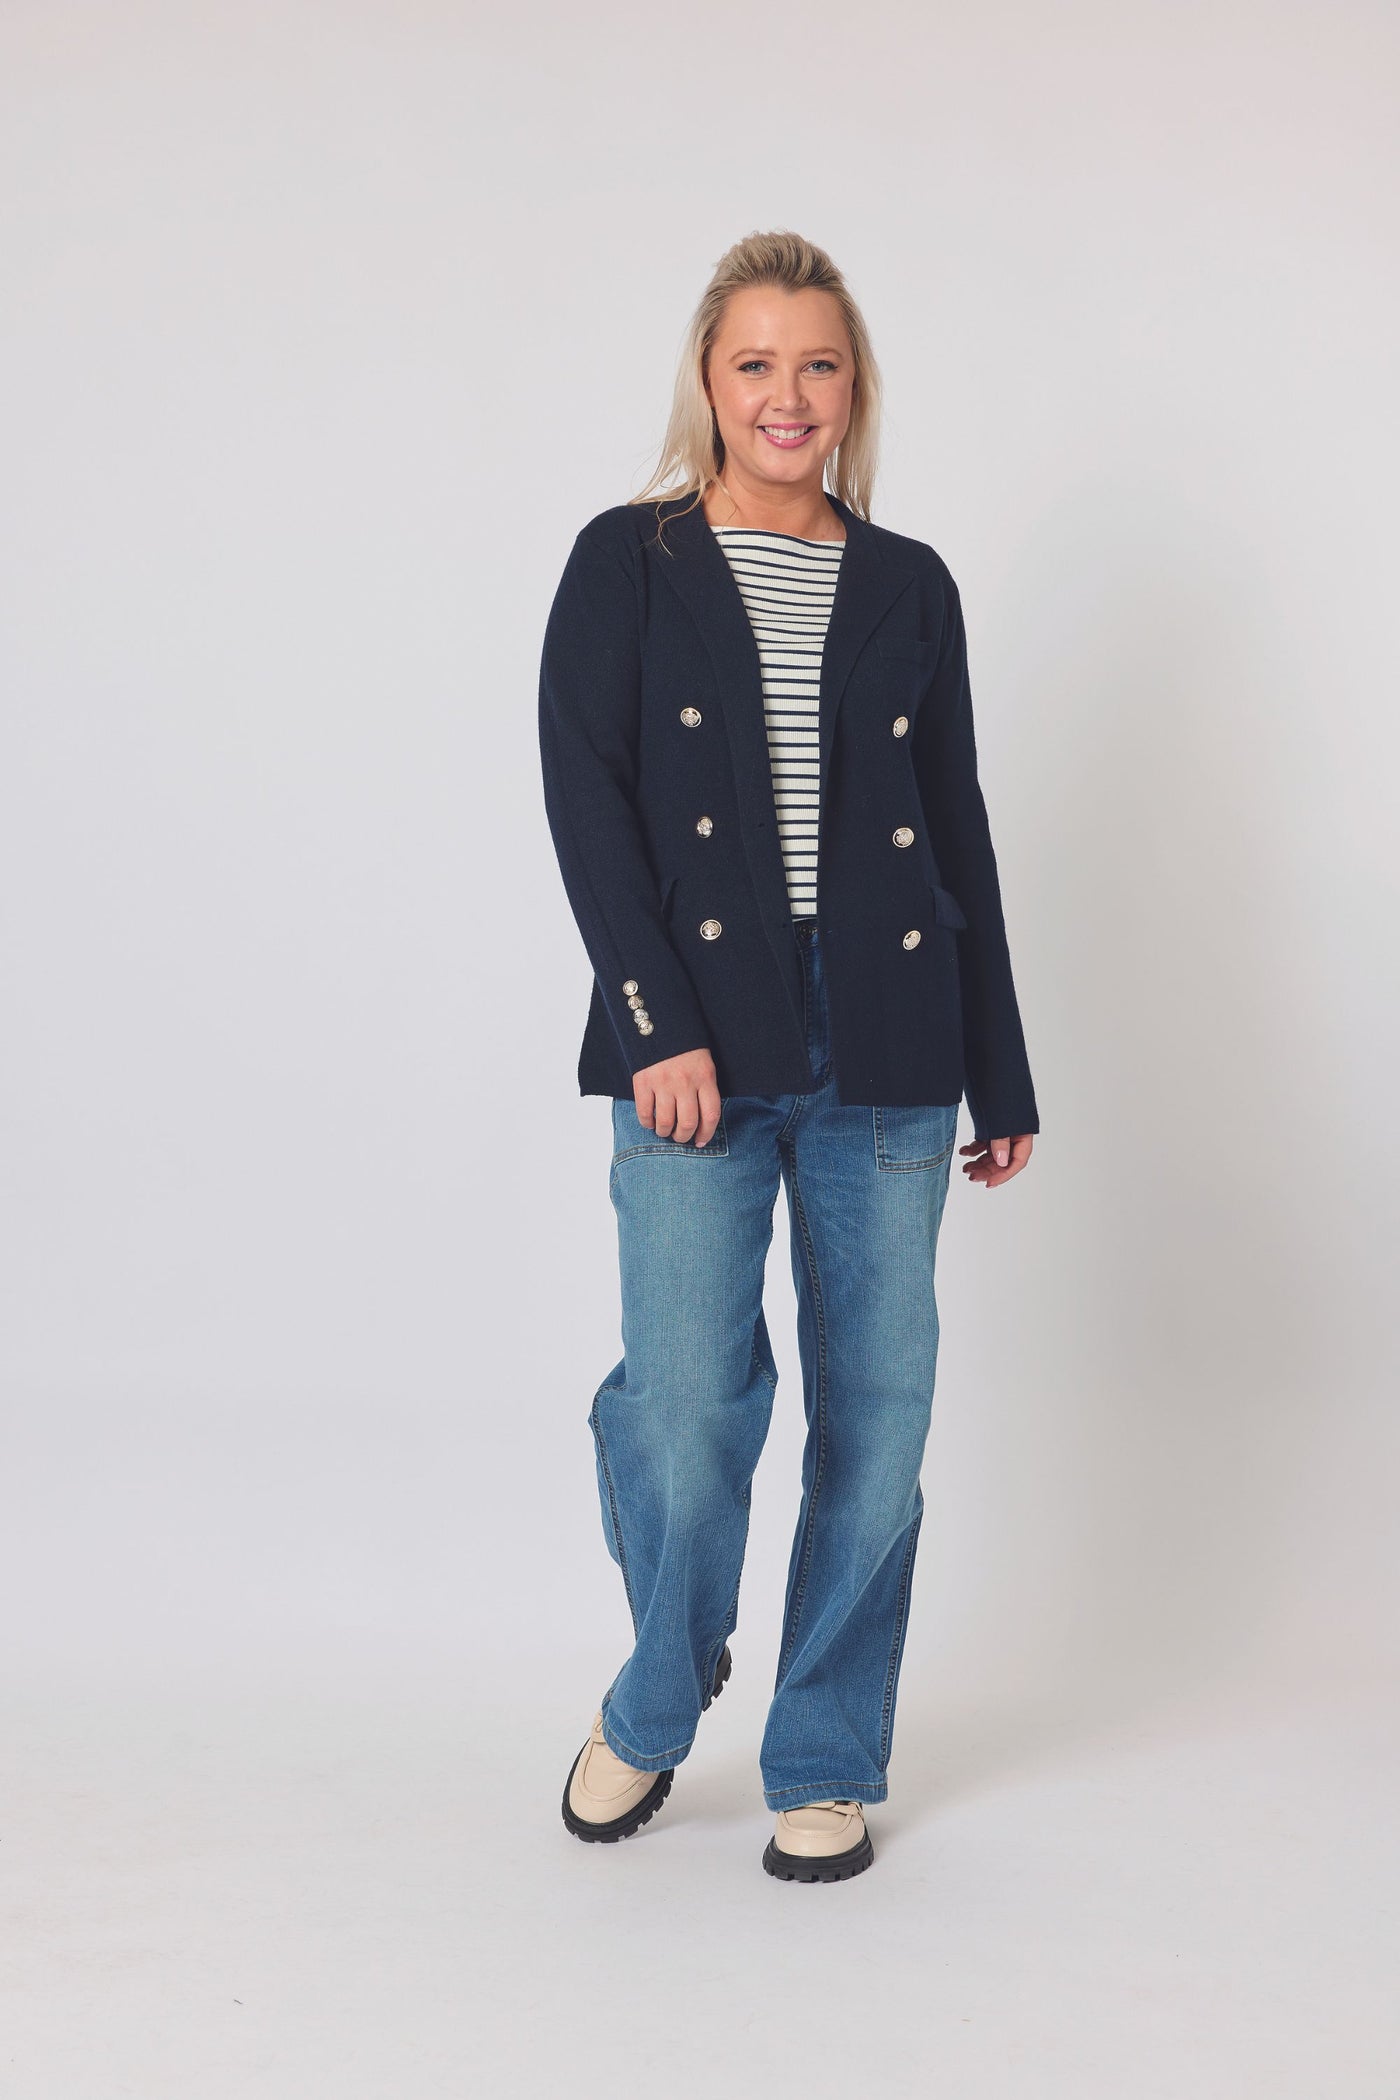 LUCY KNIT JACKET - 45303GS